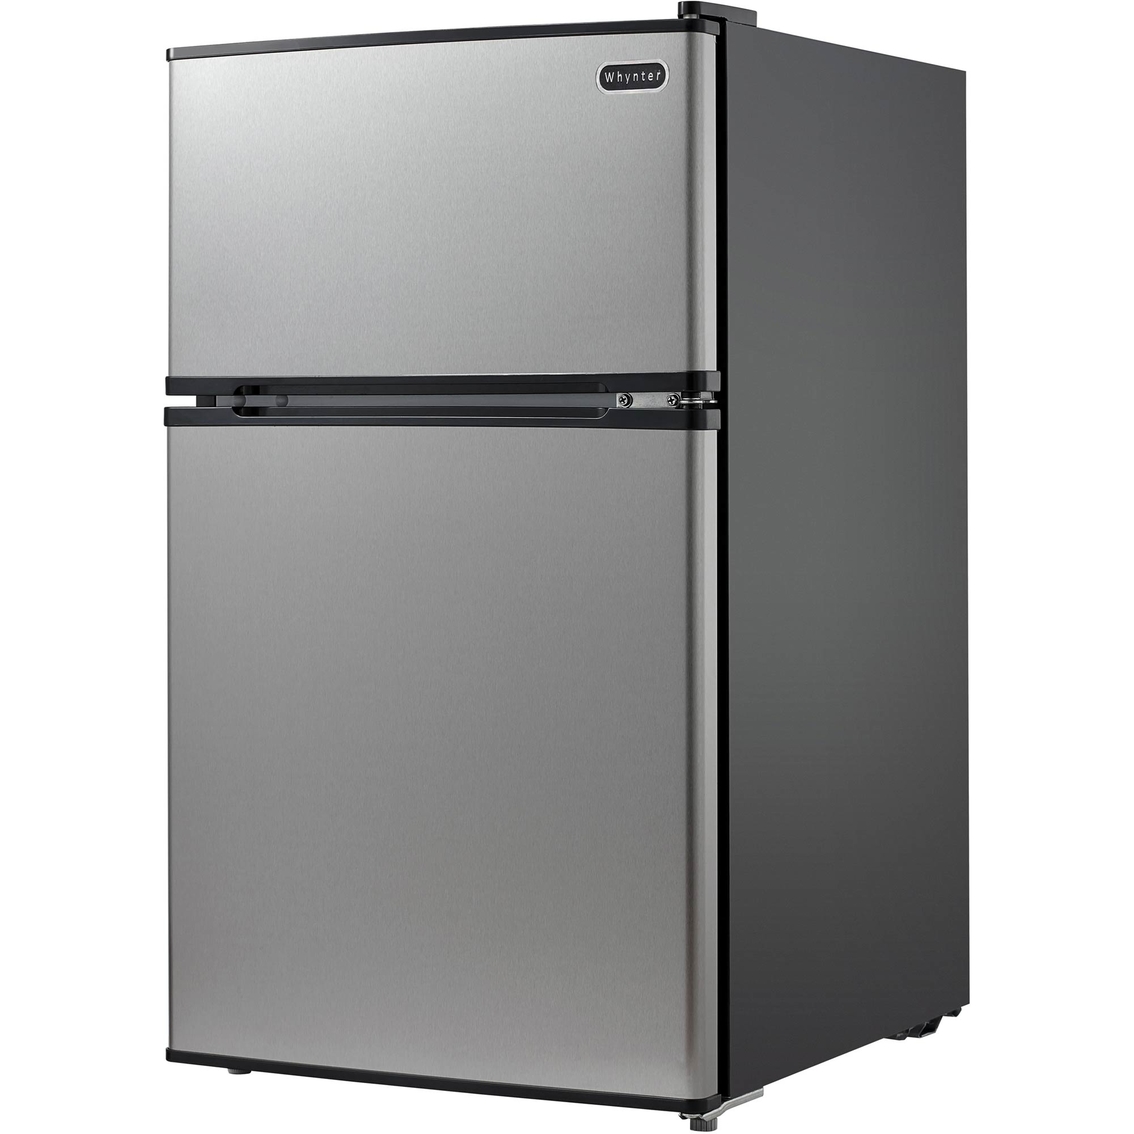 Whynter Energy Star 3.4 cu .ft. Stainless Steel Compact Refrigerator Freezer - Image 2 of 4